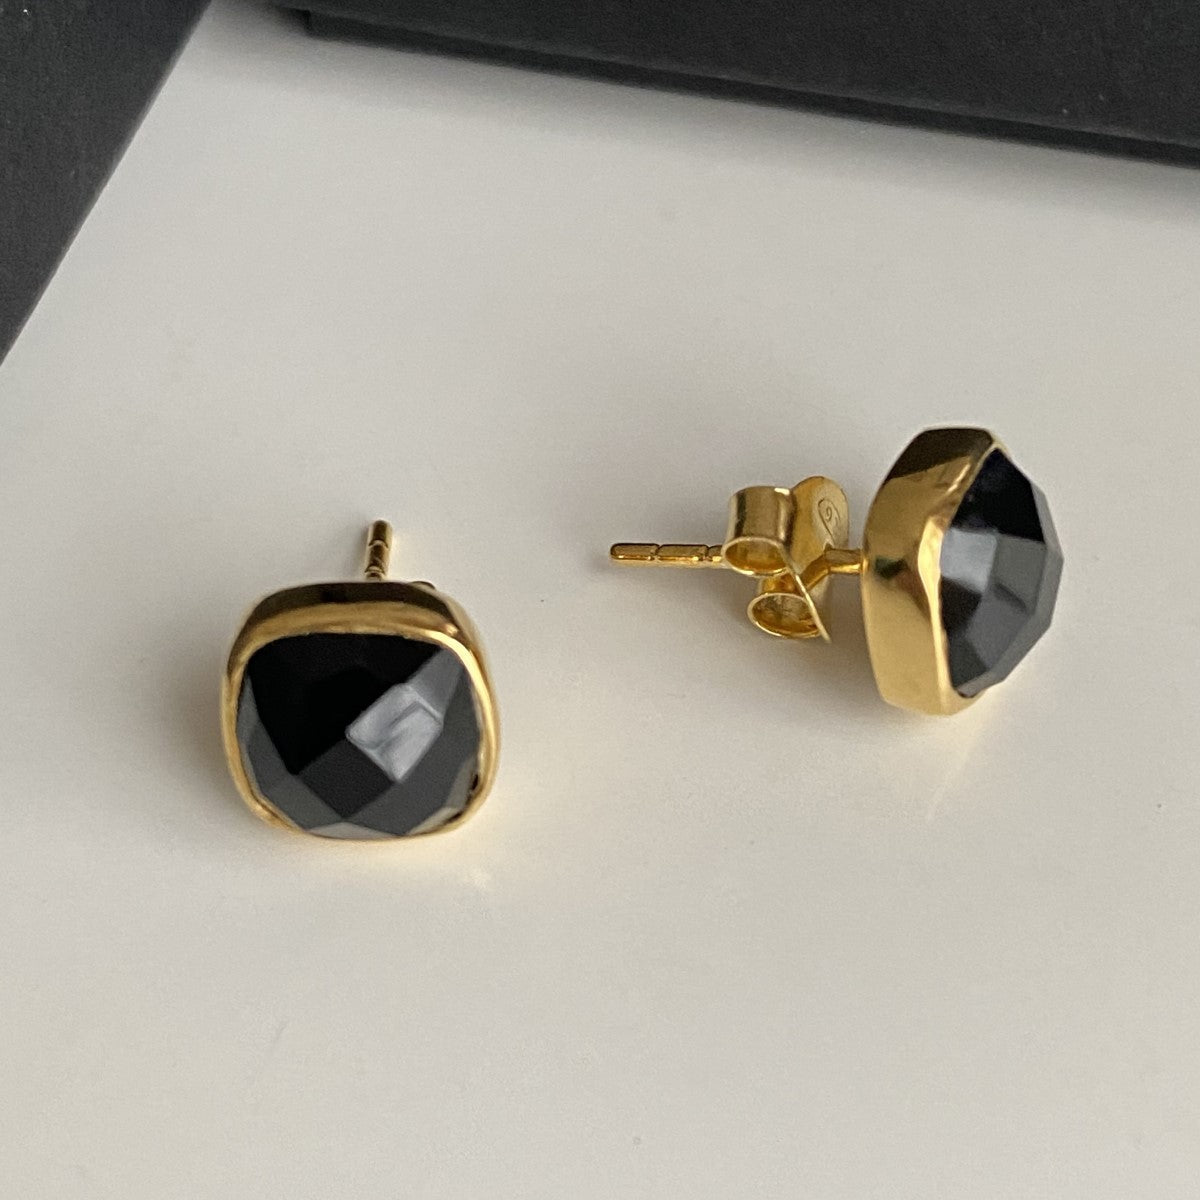 Faceted Square Black Onyx Gemstone Stud Earrings in Gold Plated Sterling Silver